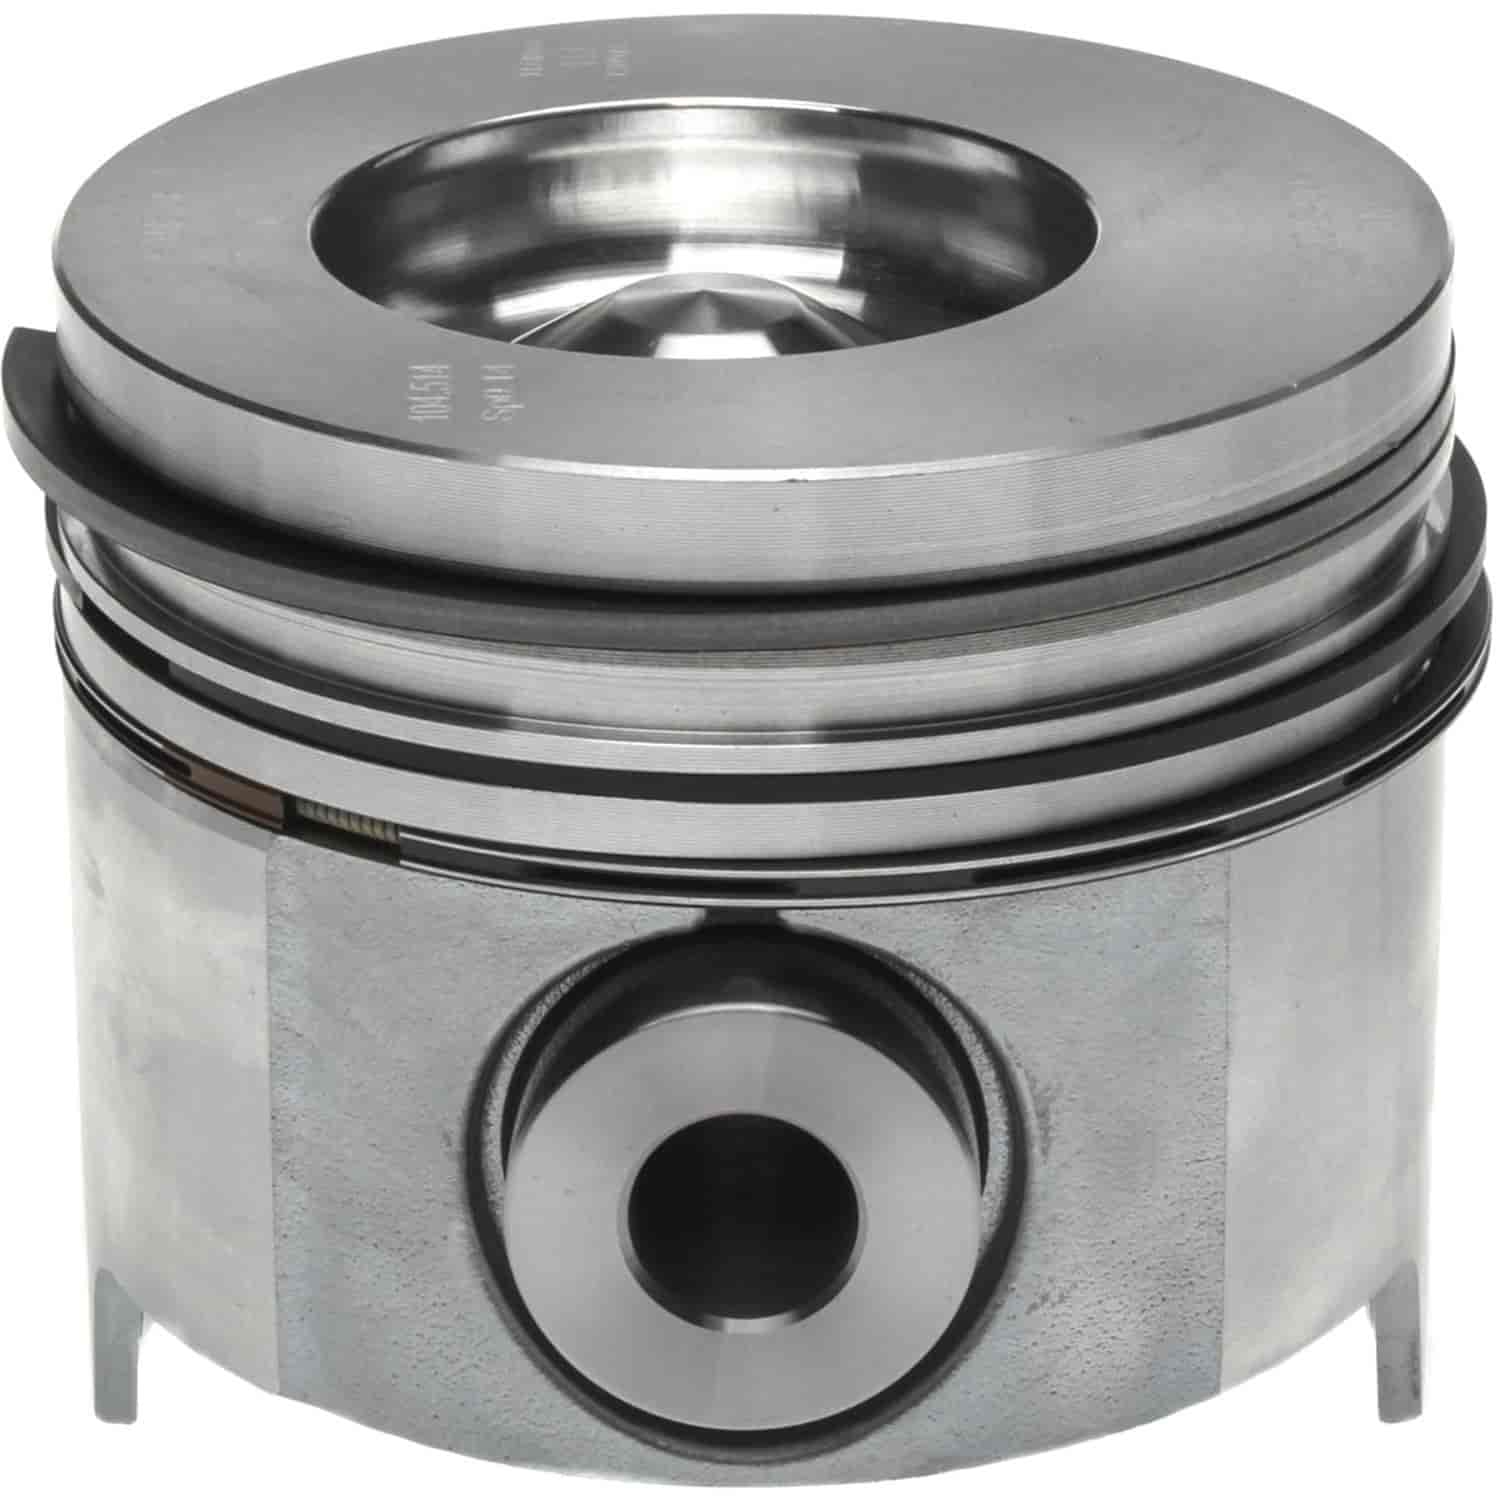 Piston and Rings Set 2001-2005 Chevy/GMC Duramax Diesel V8 6.6L Left Bank with 4.085" Bore (+.030")